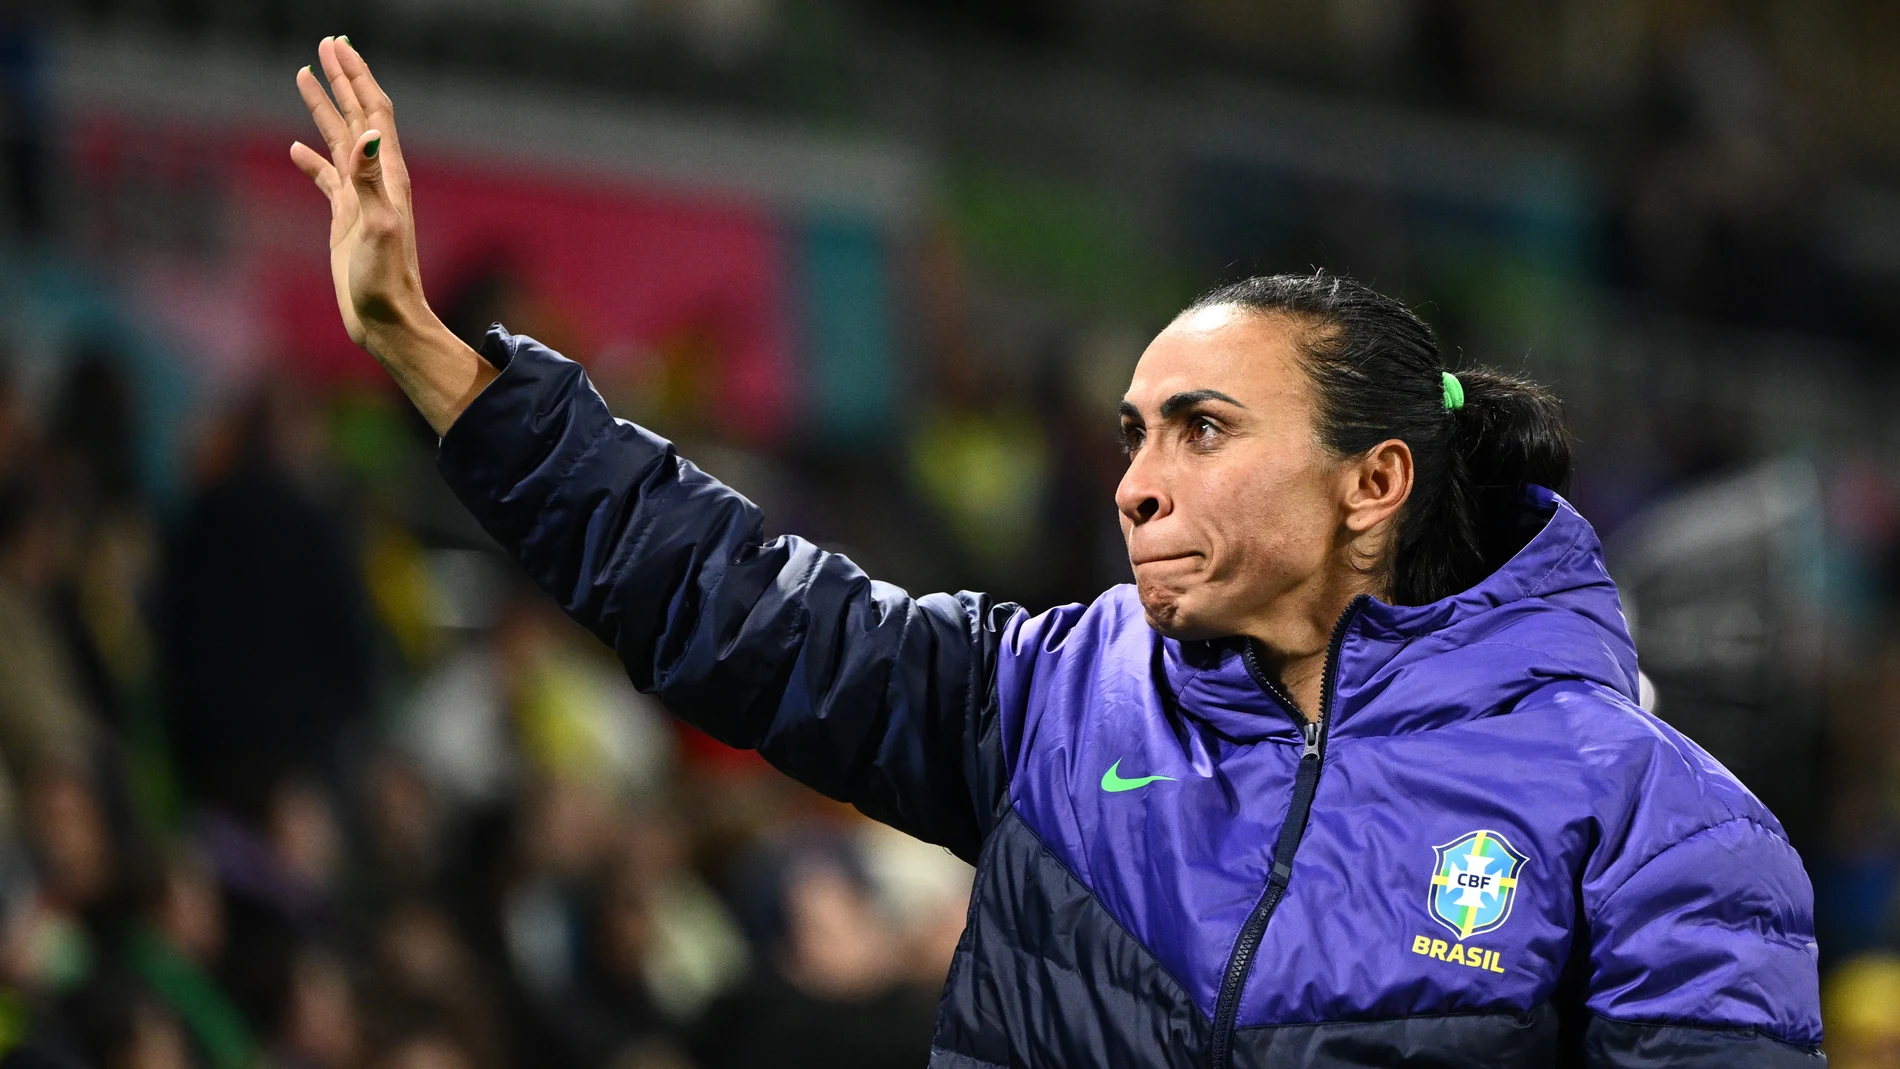 Melbourne (Australia), 02/08/2023.- Marta of Brazil reacts after the FIFA Women's World Cup 2023 group F soccer match between Jamaica and Brazil at Melbourne Rectangular Stadium in Melbourne, Australia, 02 August 2023. Brazil did not qualify for the knockout stages. (Mundial de Fútbol, Brasil) EFE/EPA/JOEL CARRETT AUSTRALIA AND NEW ZEALAND OUT EDITORIAL USE ONLY 